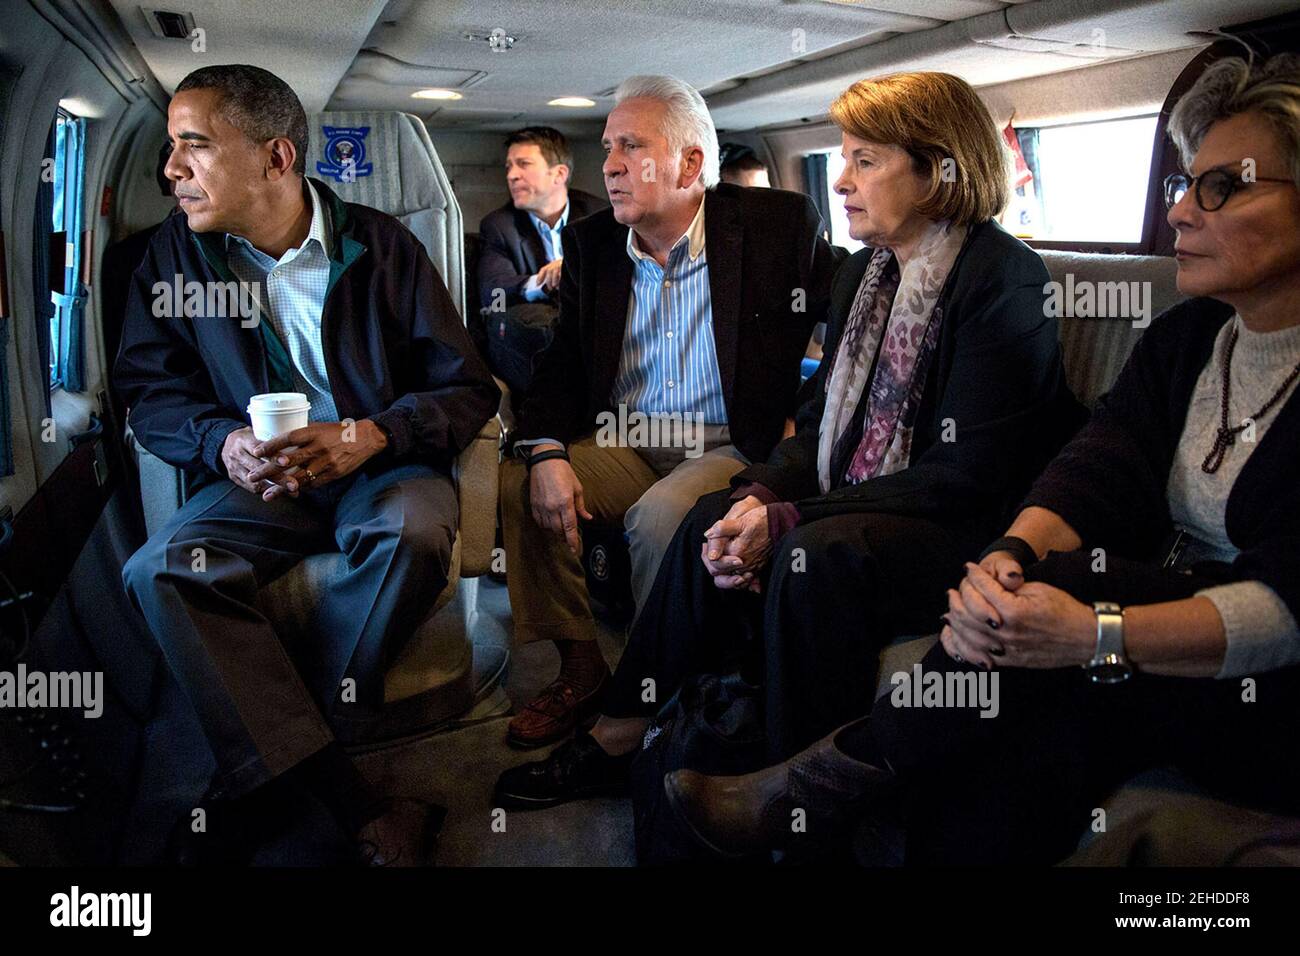 President Barack Obama views drought conditions in California, flying aboard Marine One from Fresno to Firebaugh, accompanied by Rep. Jim Costa and Senators Dianne Feinstein and Barbara Boxer, Feb. 14, 2014. Stock Photo